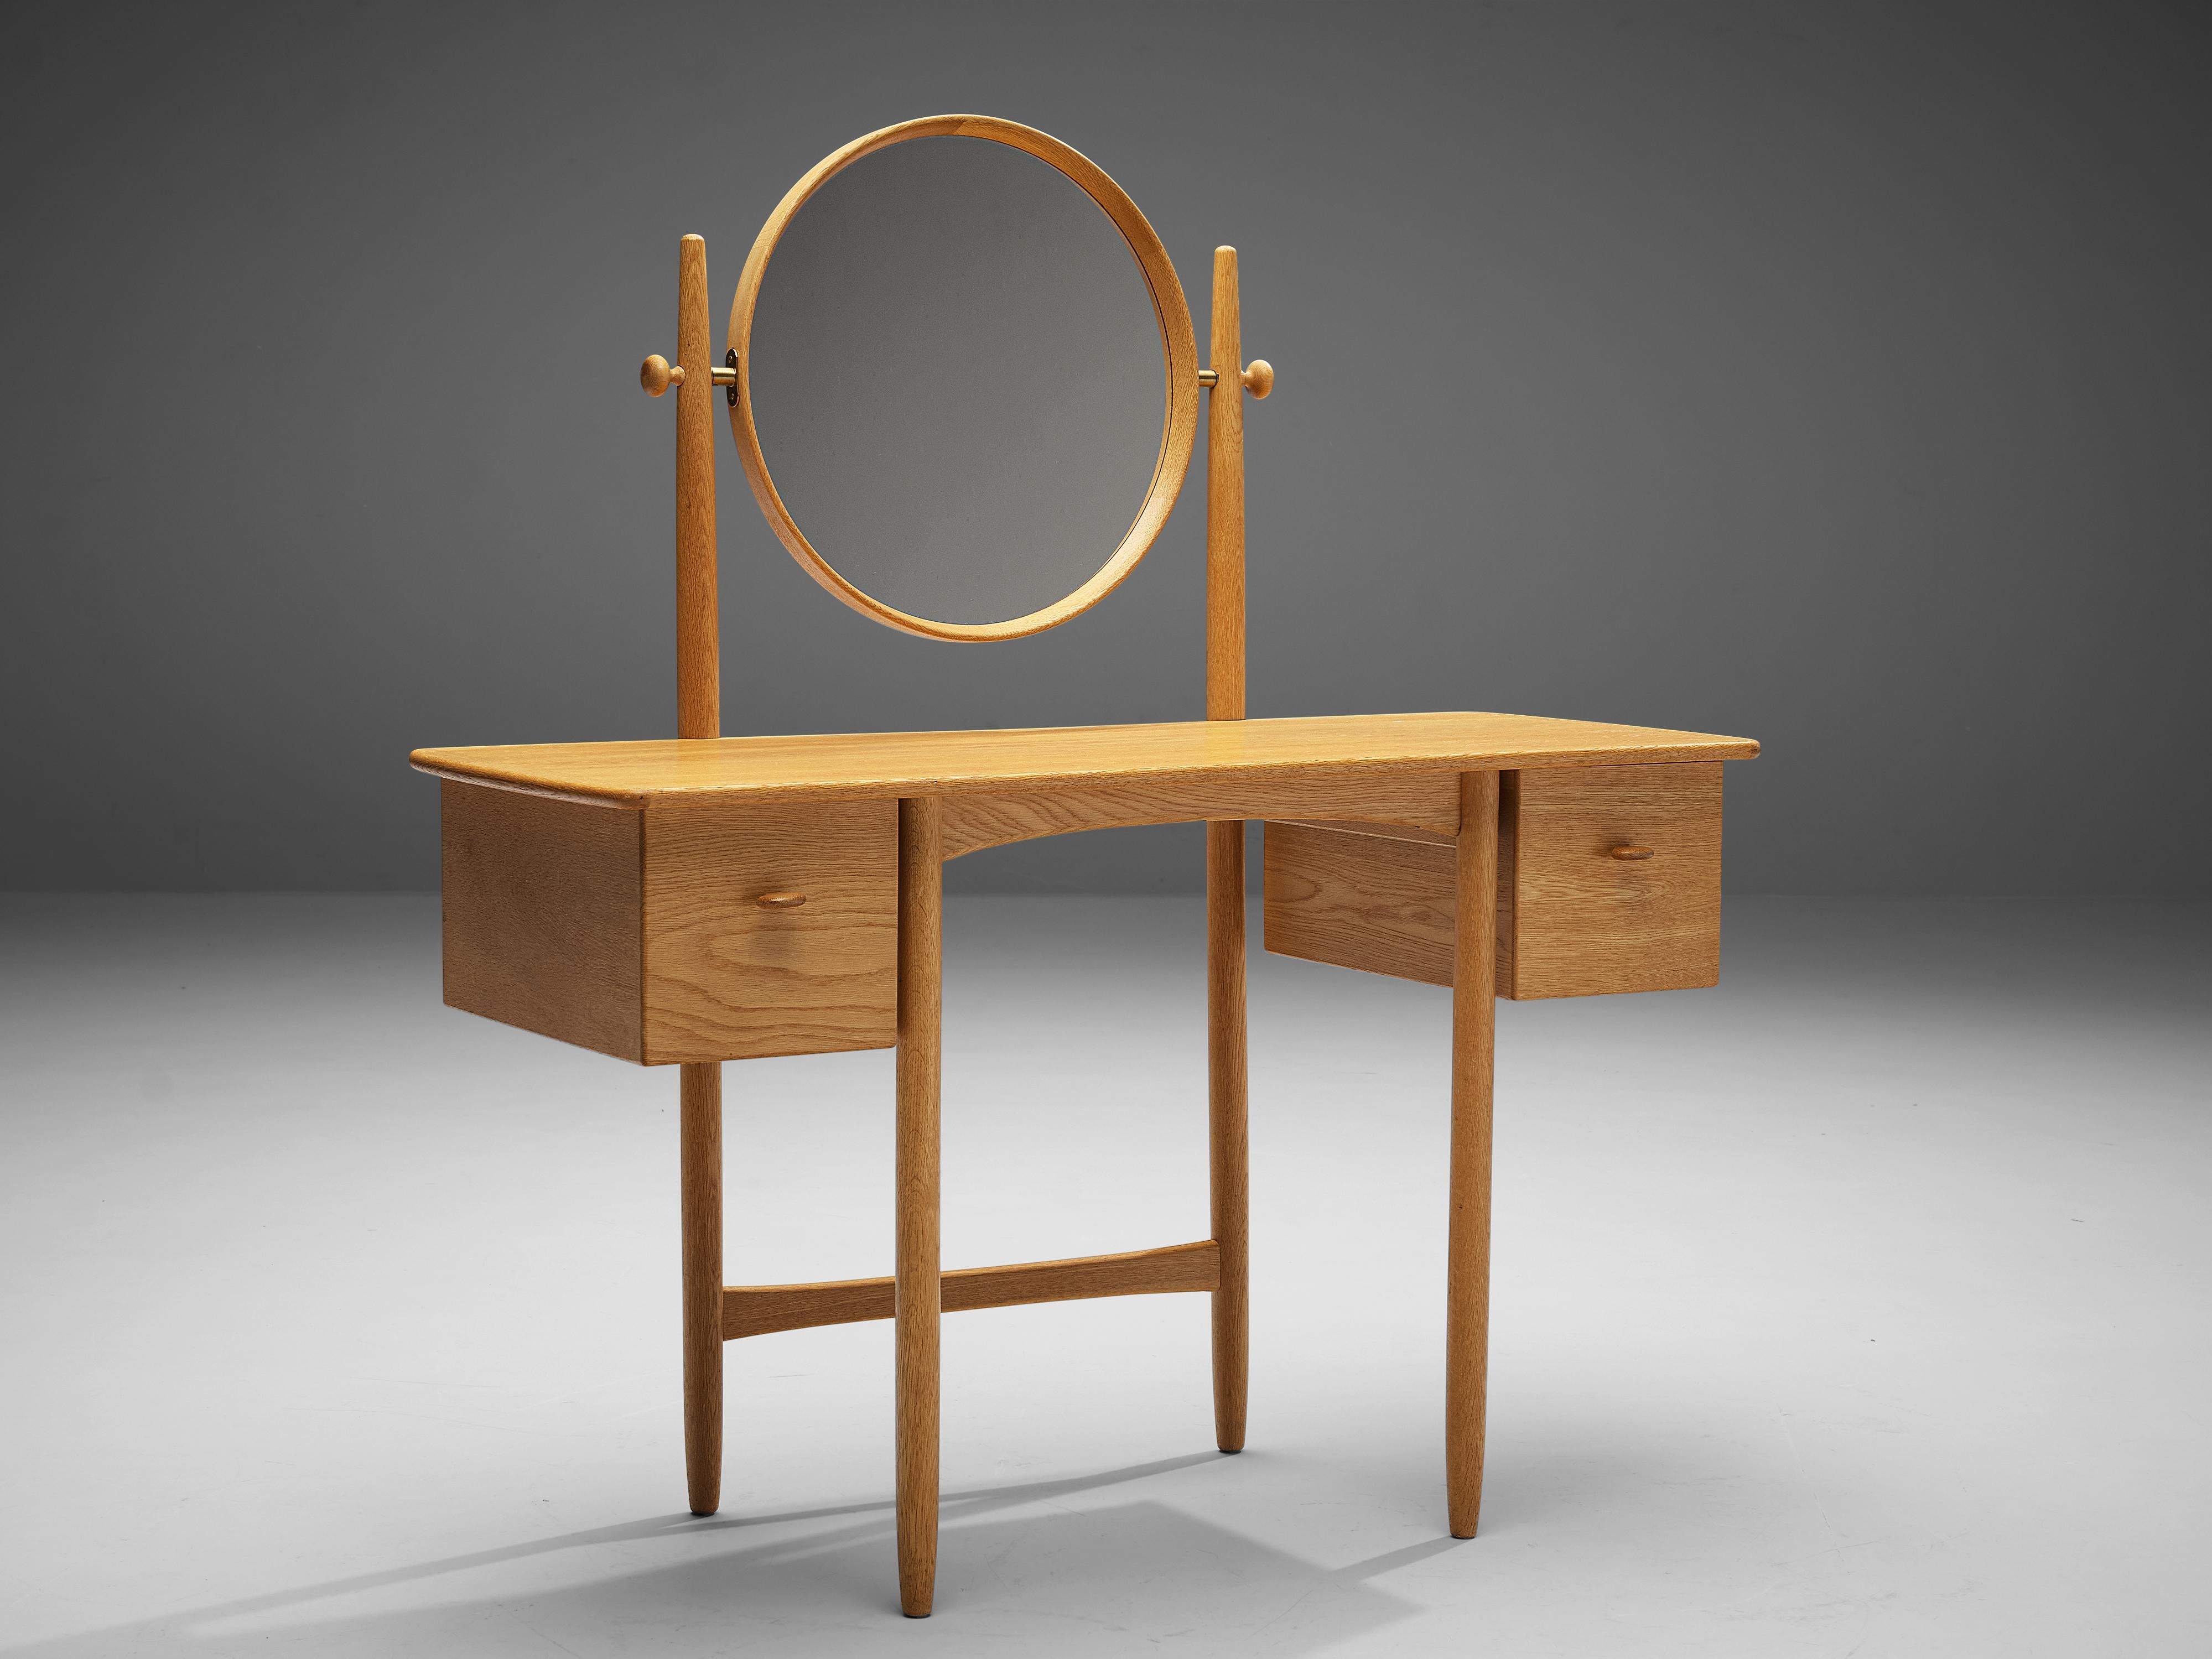 Sven Engström and Gunnar Myrstrand for Bodafors, dressing table, oak, glass, brass, Sweden, 1960s

Admirable dressing table by Swedish designers Sven Engström and Gunnar Myrstrand, manufactured by Bodafors in the 1960s. The clarity in lines and